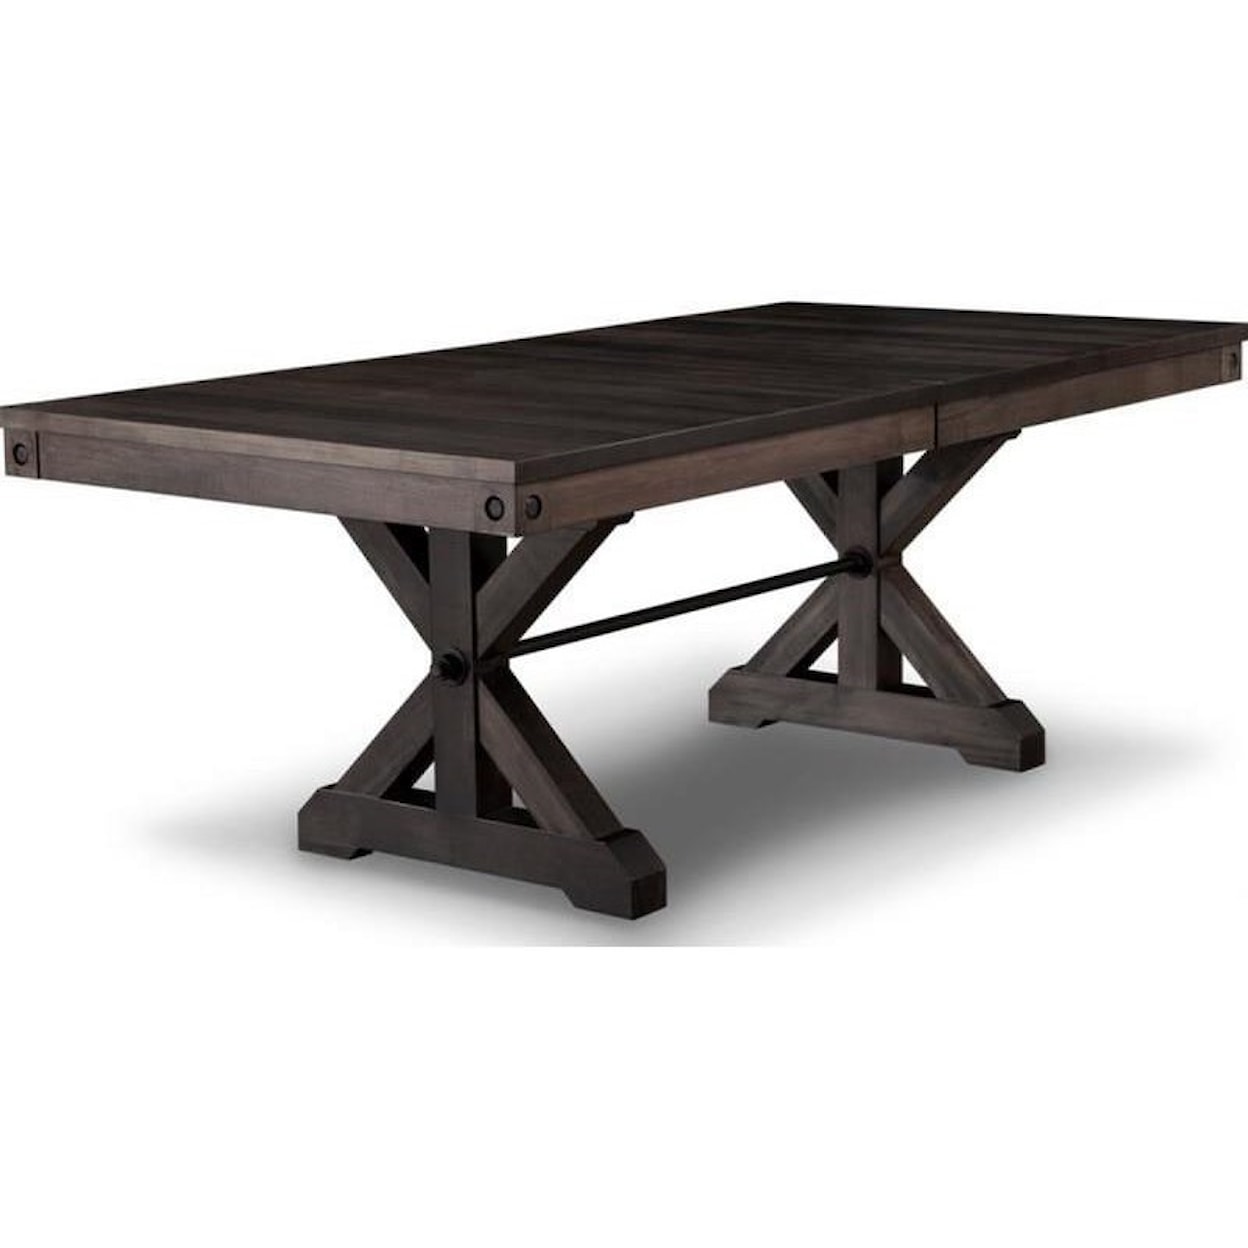 Handstone Rafters 42x84 Trestle Table